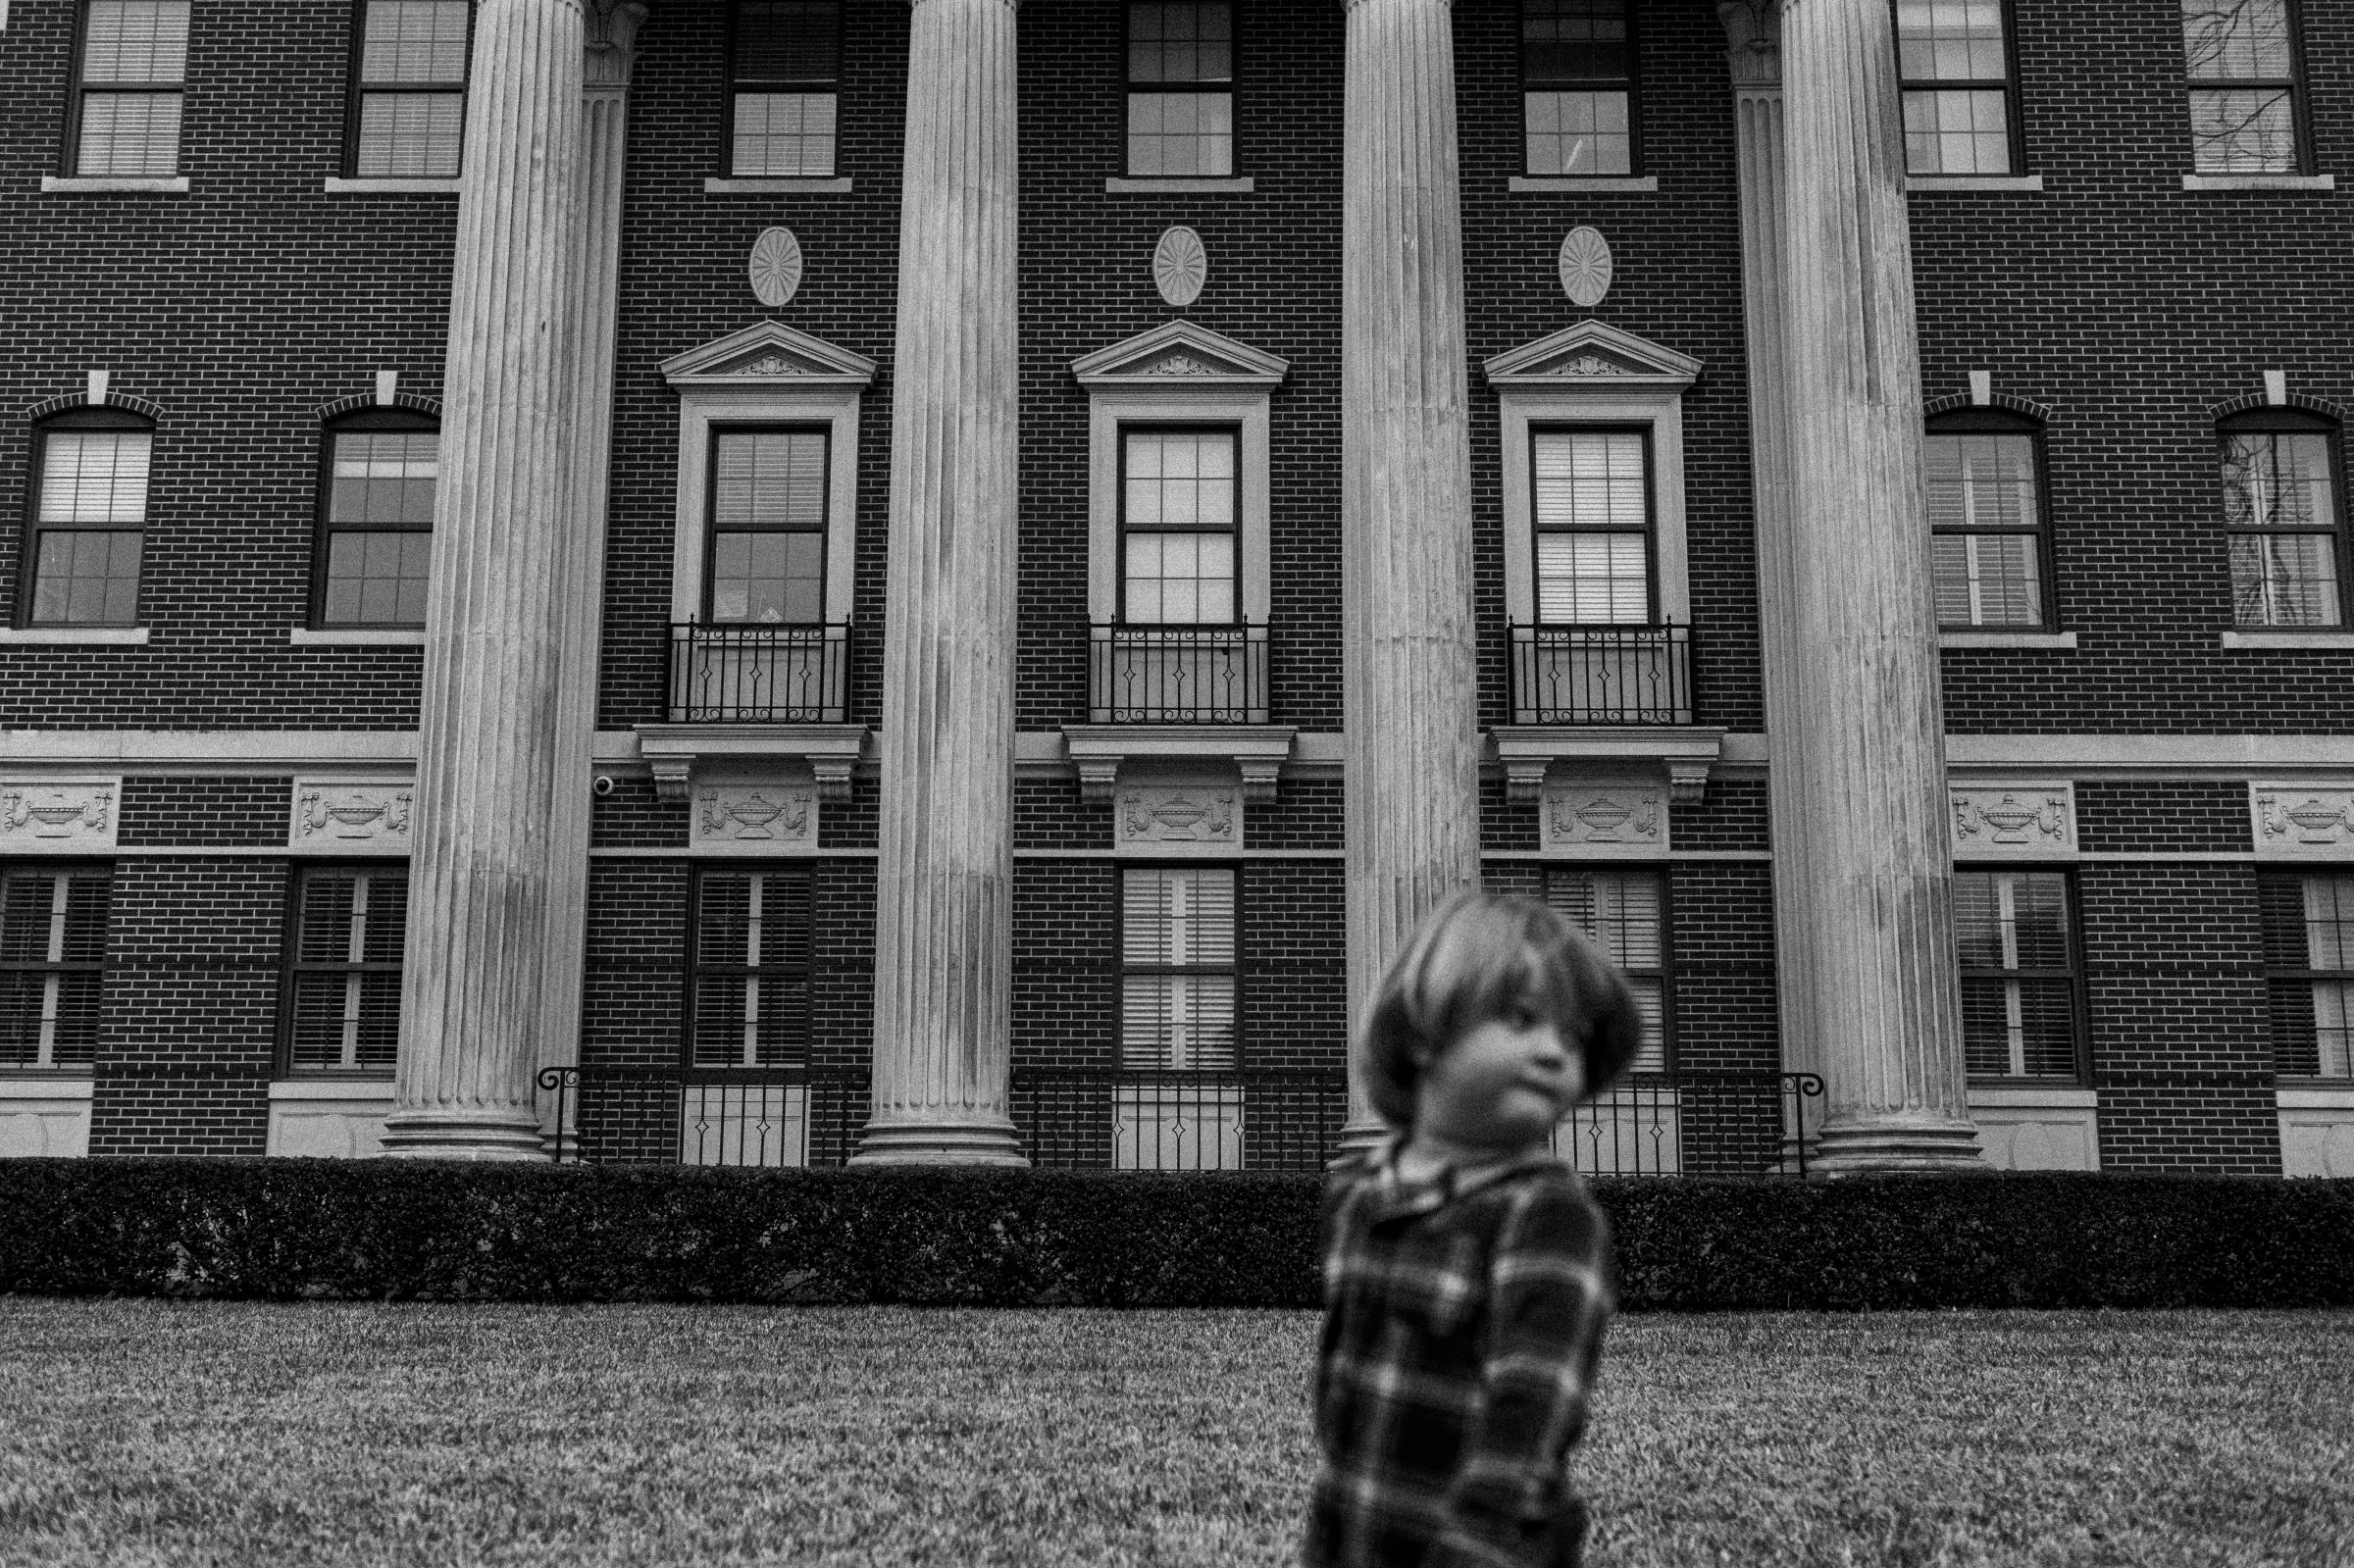 A young child wonders the grounds of Baylor University in Waco, Texas, 01/08/2022. A rainy day in Waco sets the mood of the empty campus at Baylor. As the pandemic continues the youths untold stories of the pandemic still lie hidden.